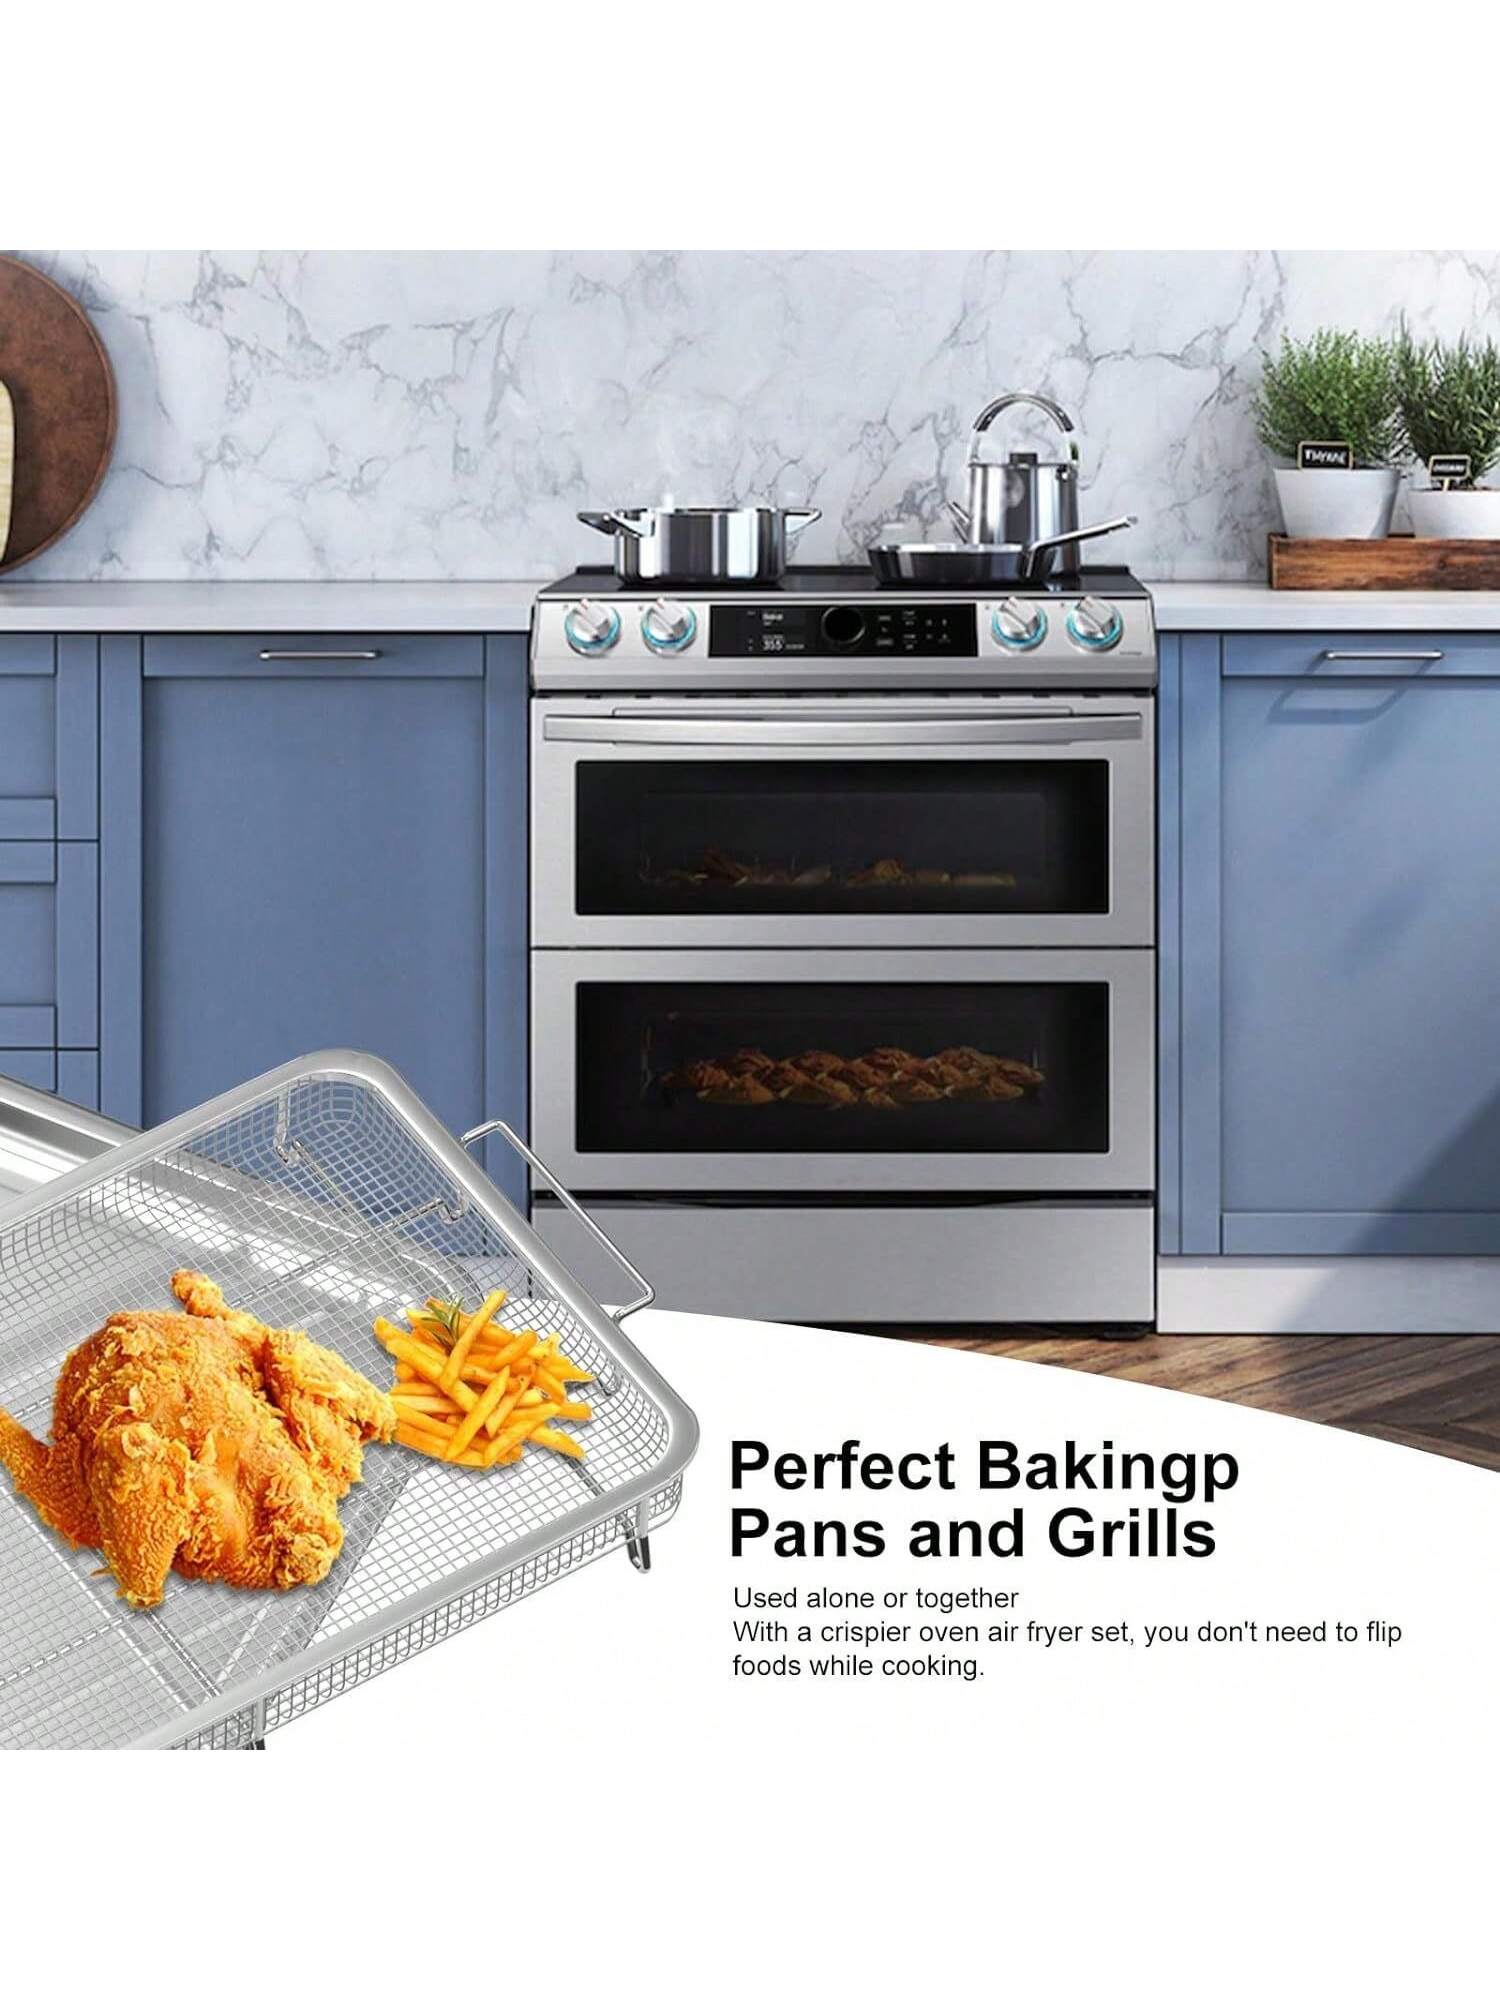 Extra Large Air Fryer Basket and Tray for Oven, 18.8'' x 13.3'' Stainless  Steel Crisper Tray and Basket for Convection Oven, Baking Pan Perfect for